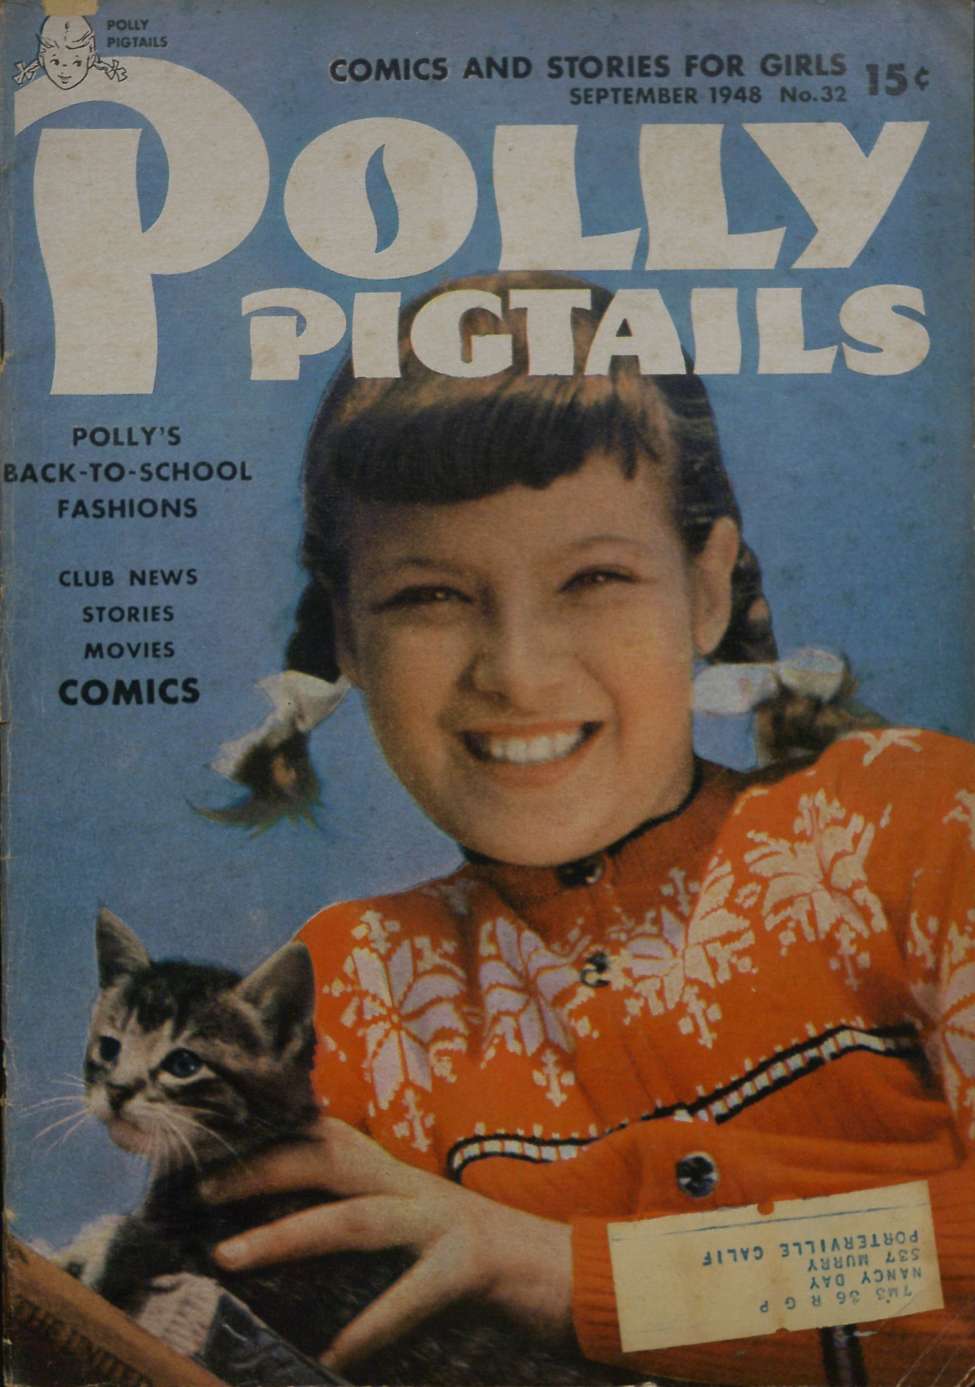 Book Cover For Polly Pigtails 32